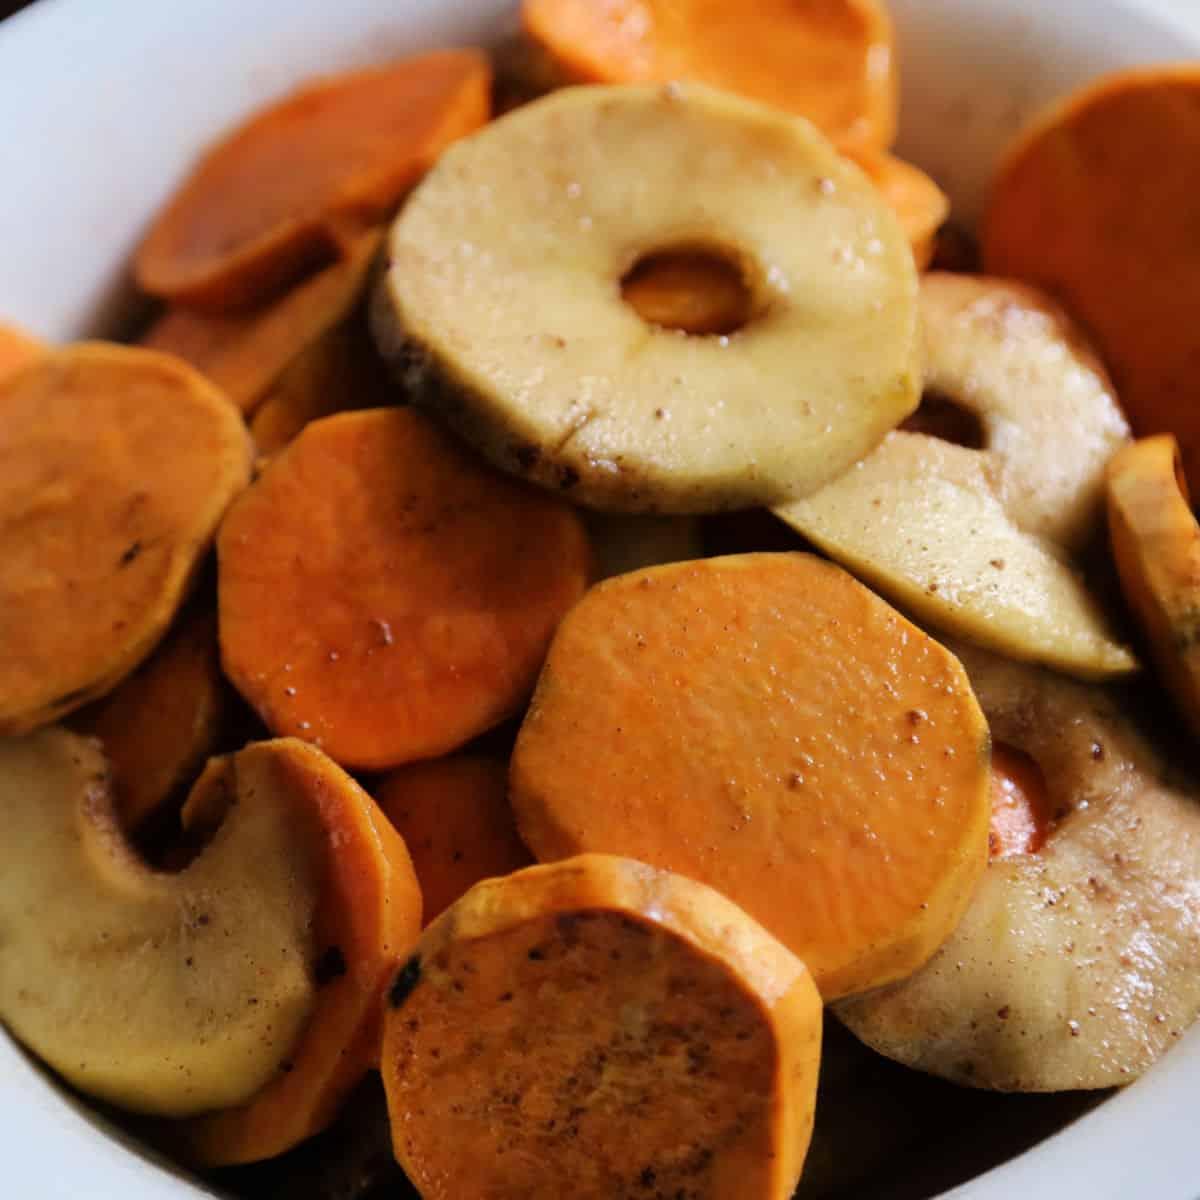 Slices of sweet potatoes and apples in a white bowl